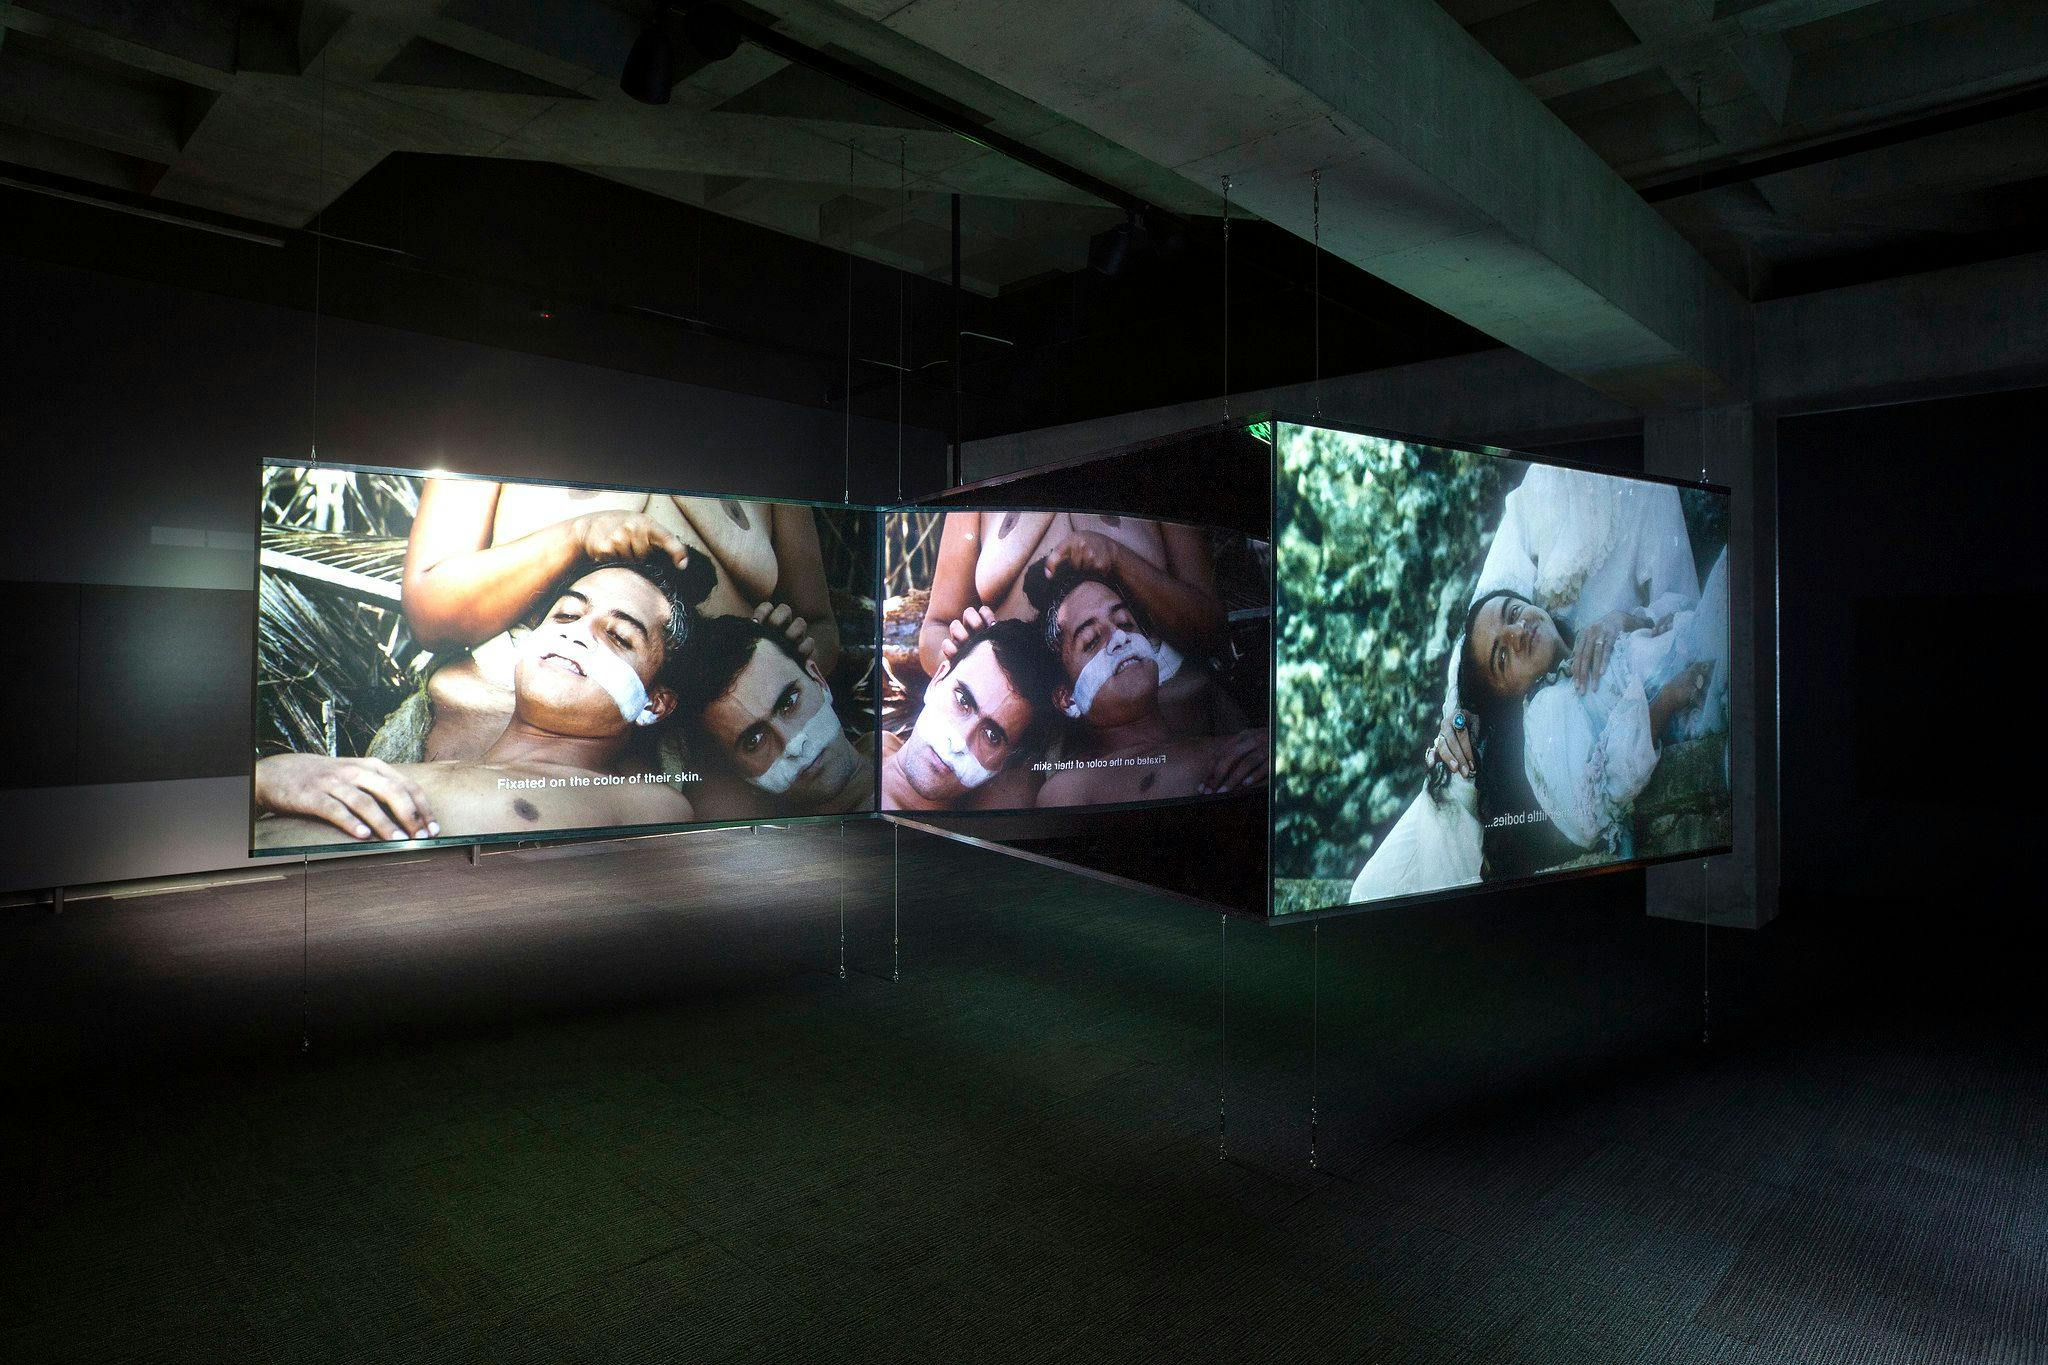 Dark exhibition space with three video screens in a zig-zag formation.